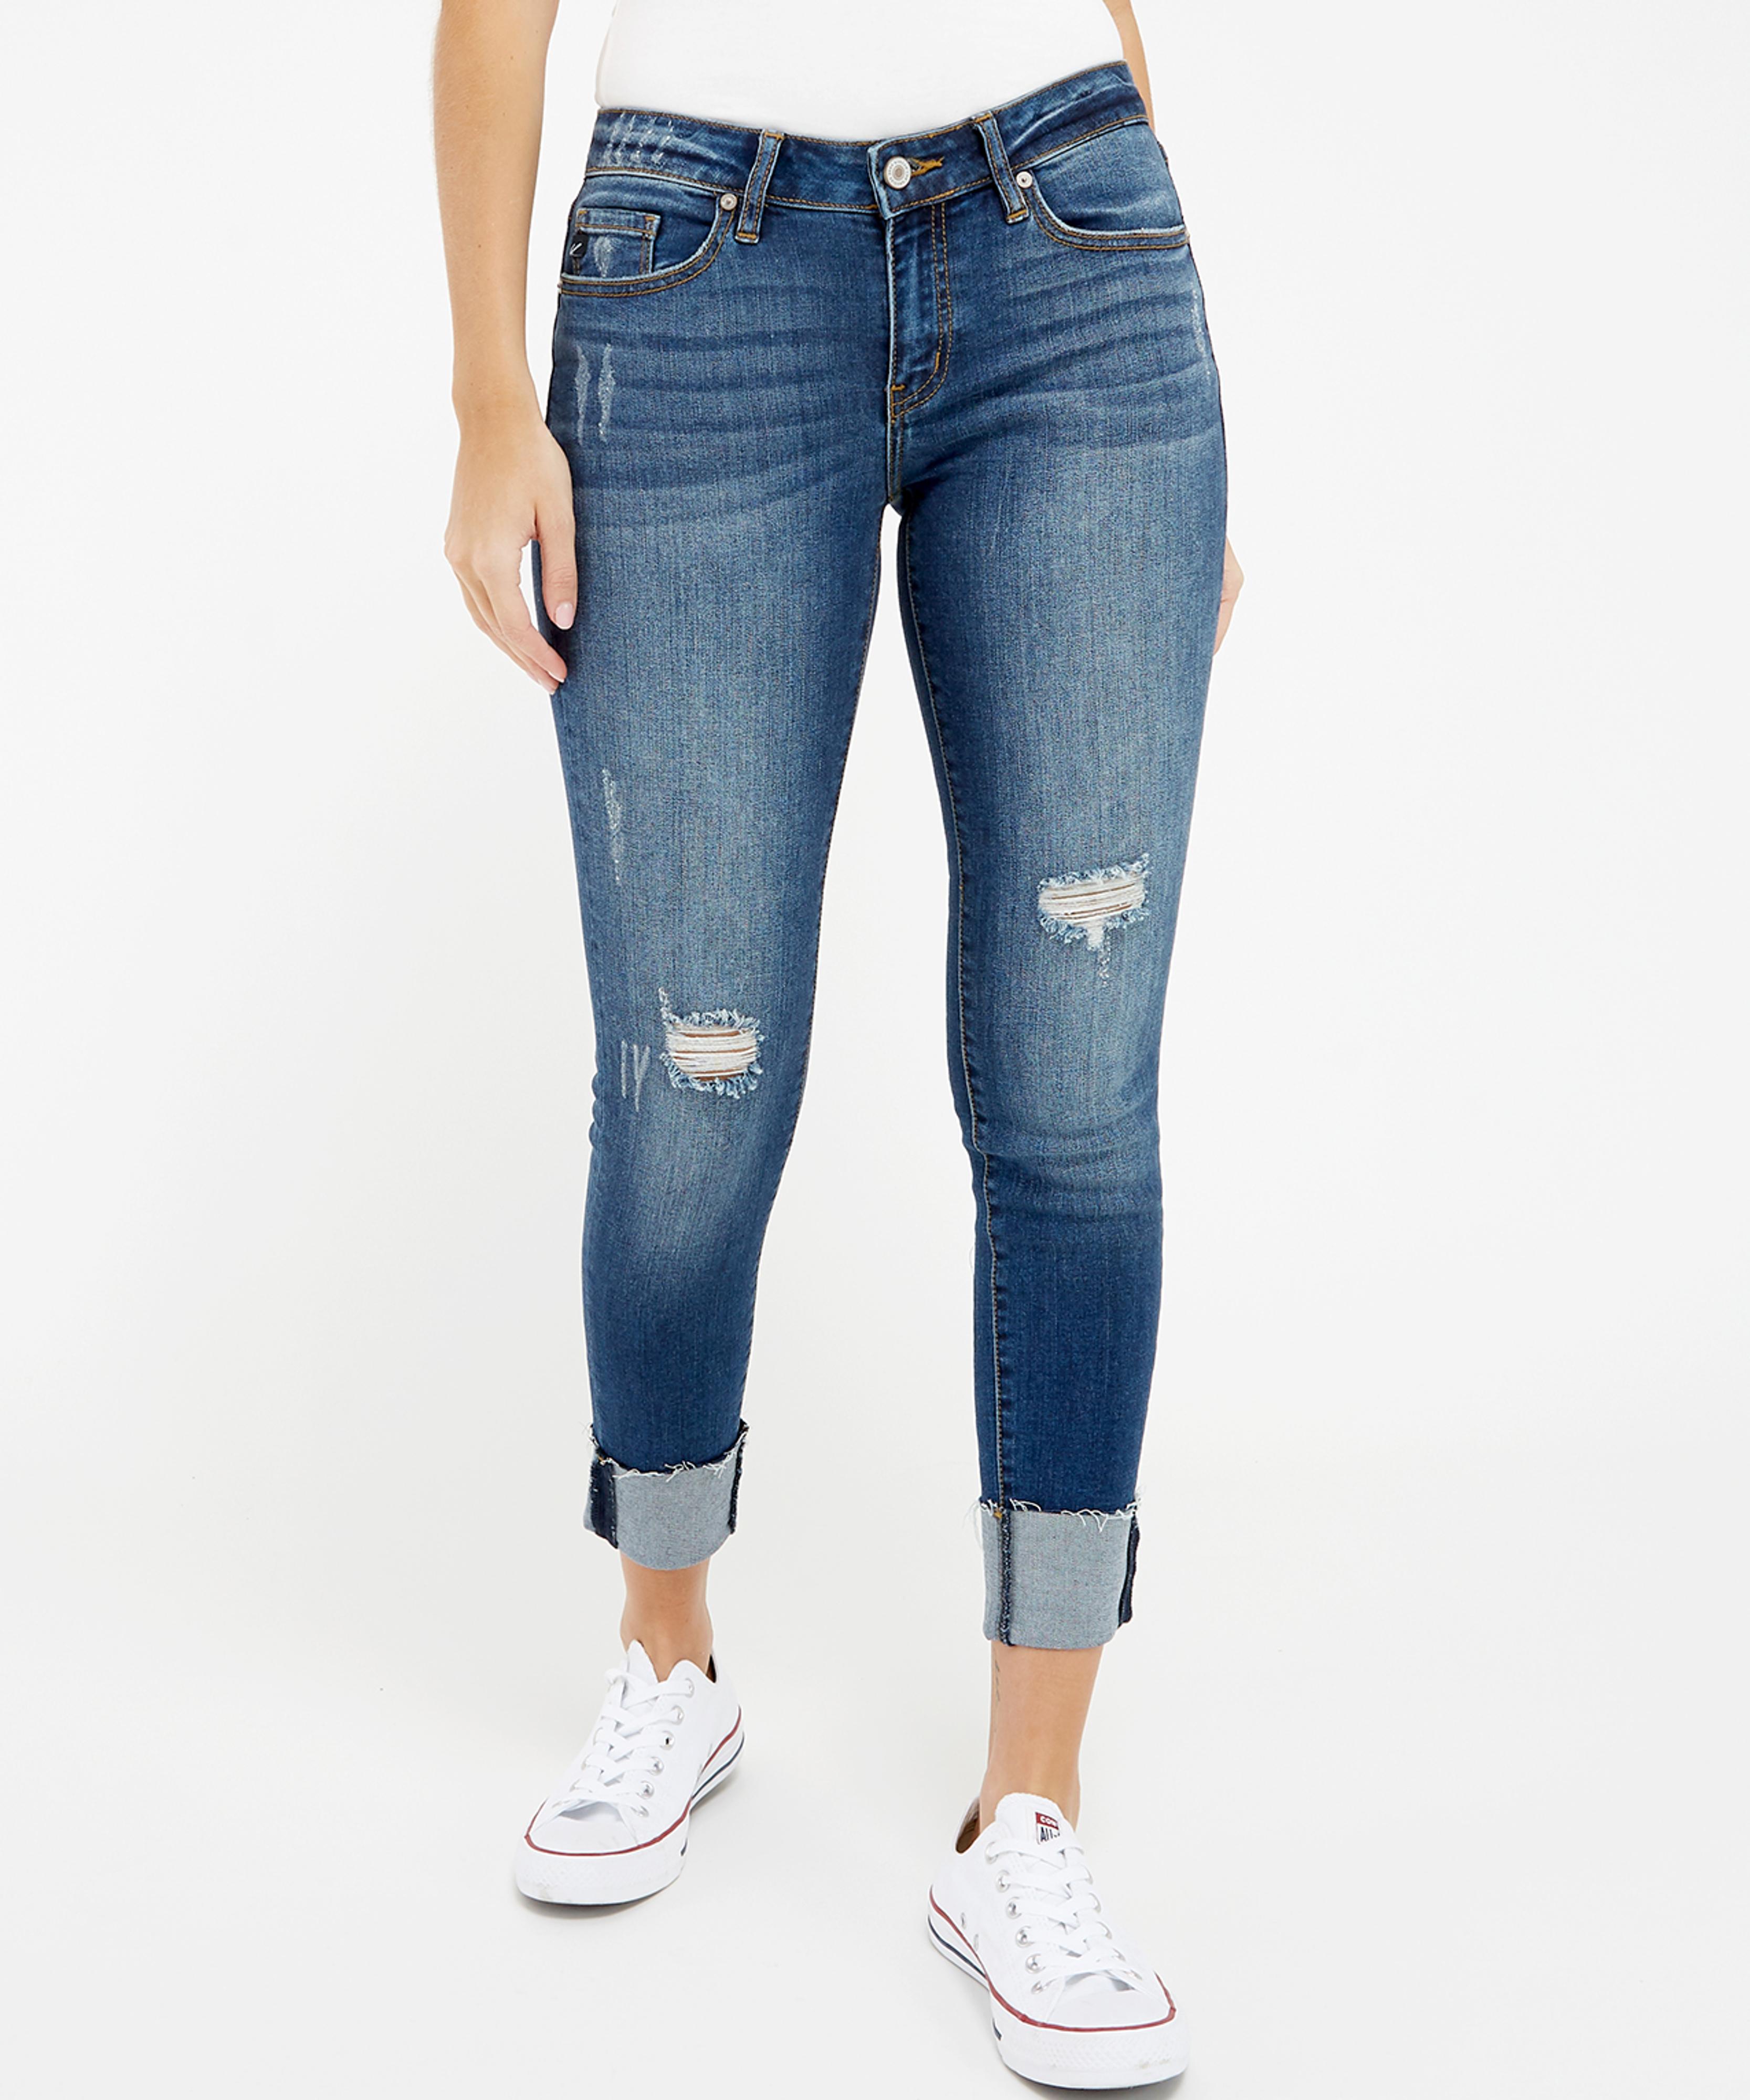  Gemma Low Rise Ankle Skinny